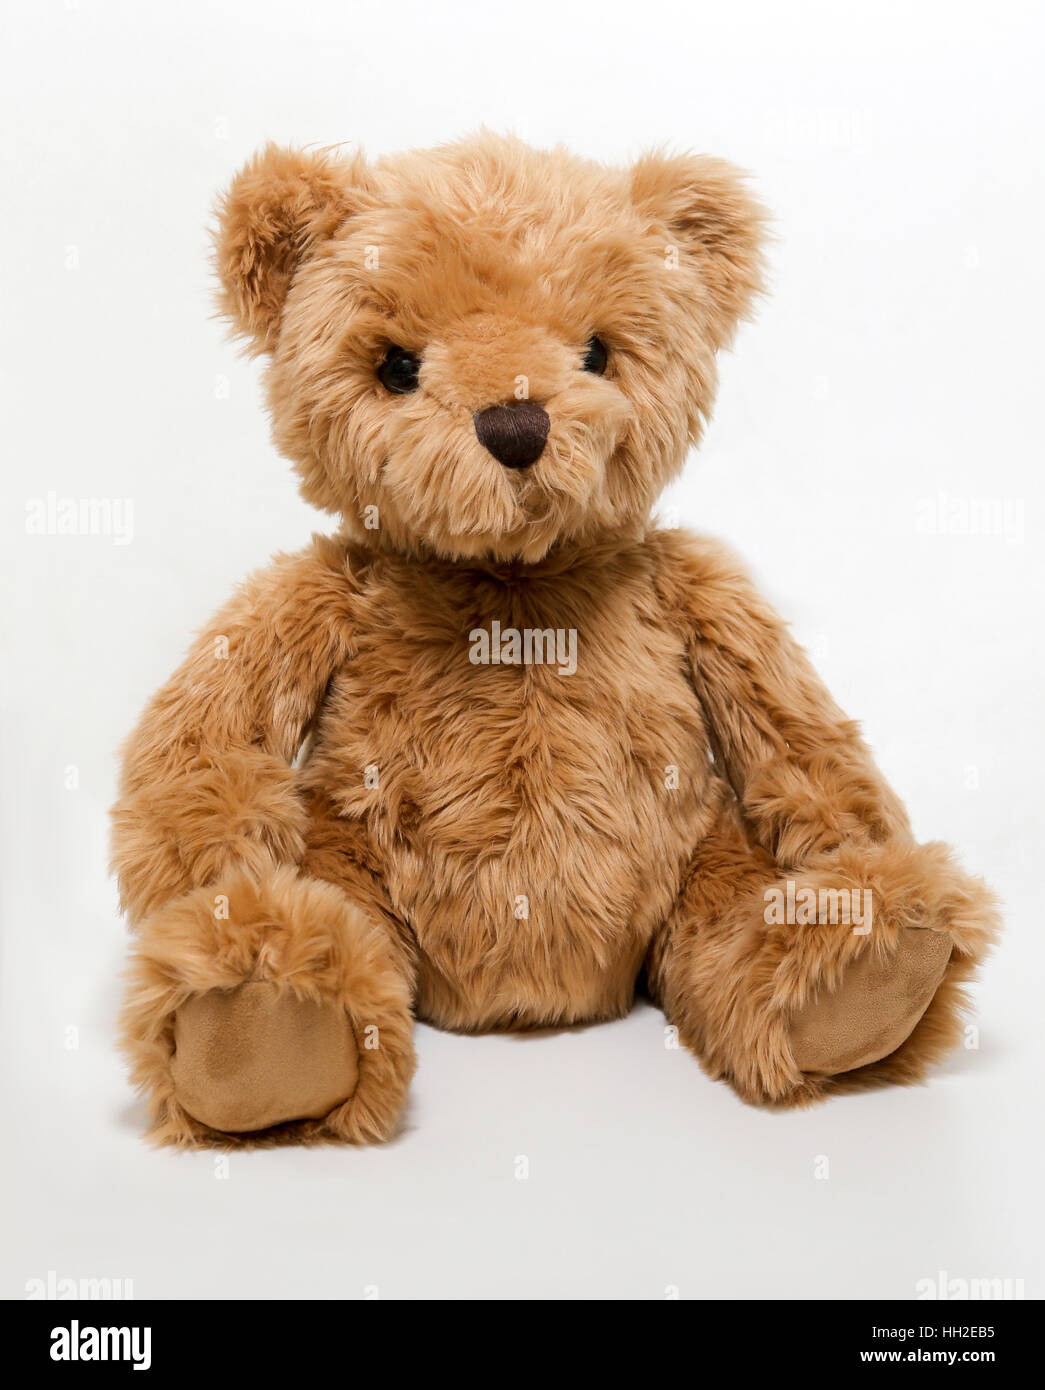 Children's teddy bear toy against a white background Stock Photo